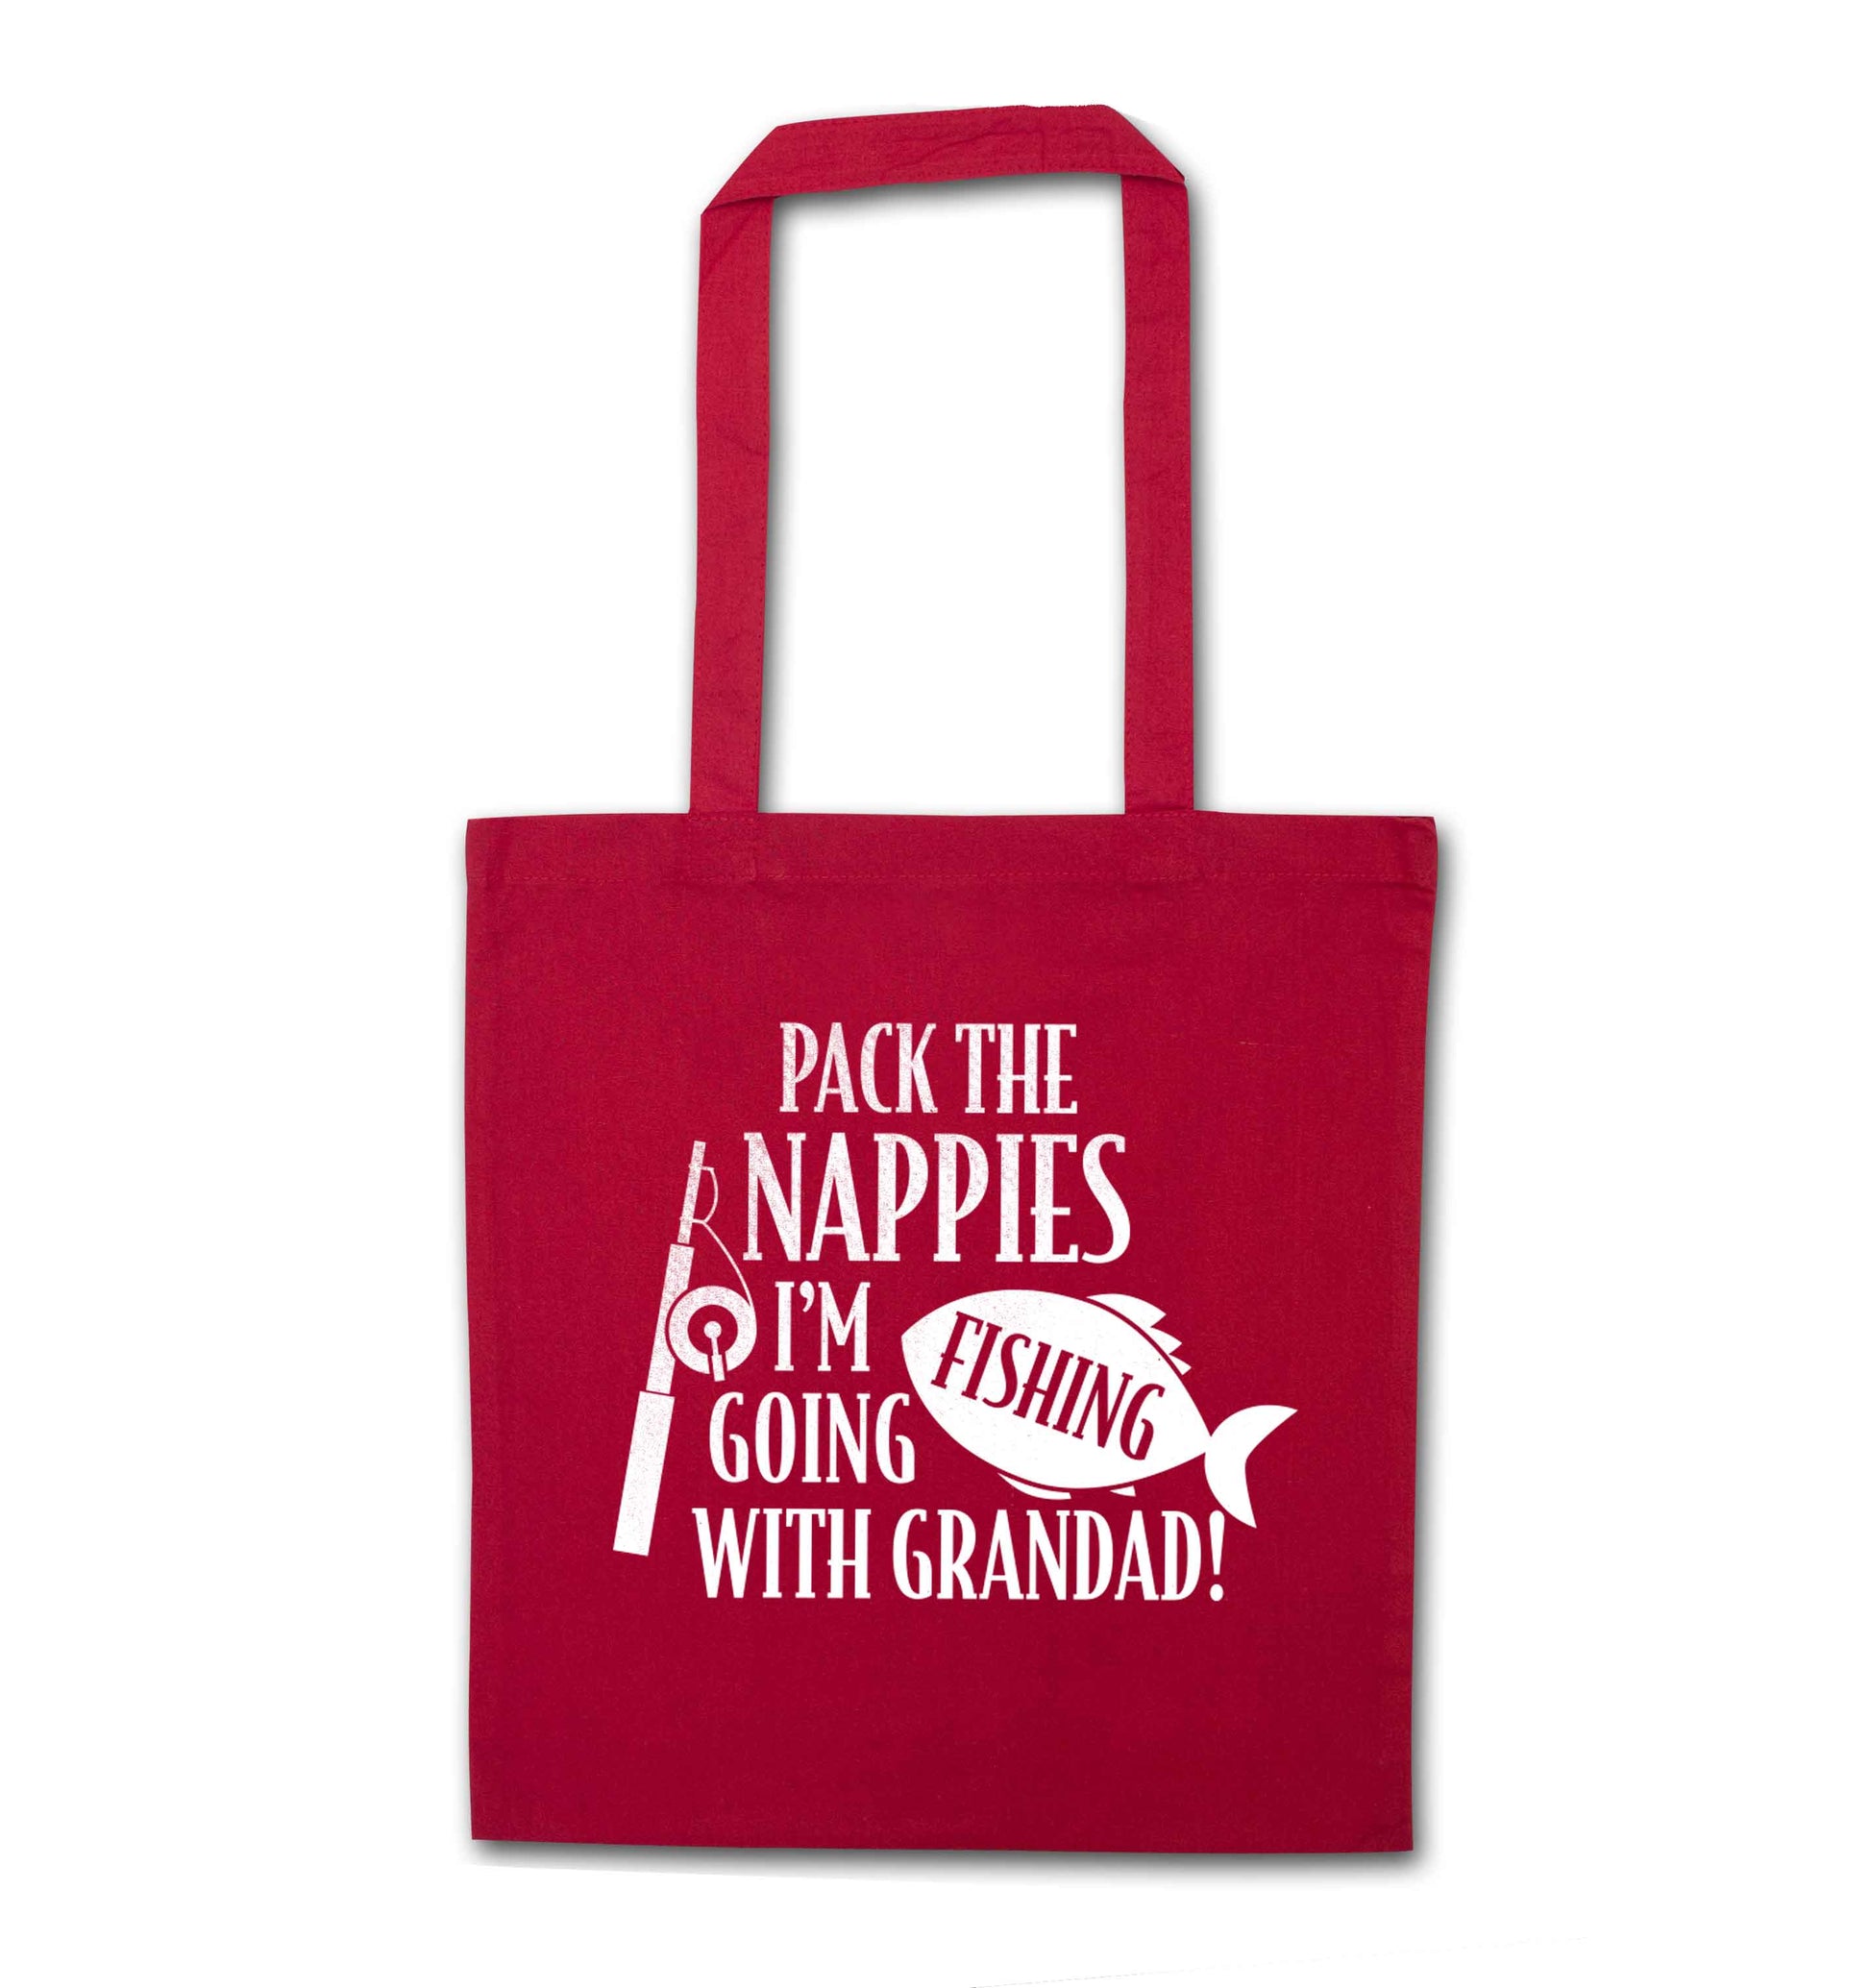 Pack the nappies I'm going fishing with Grandad red tote bag